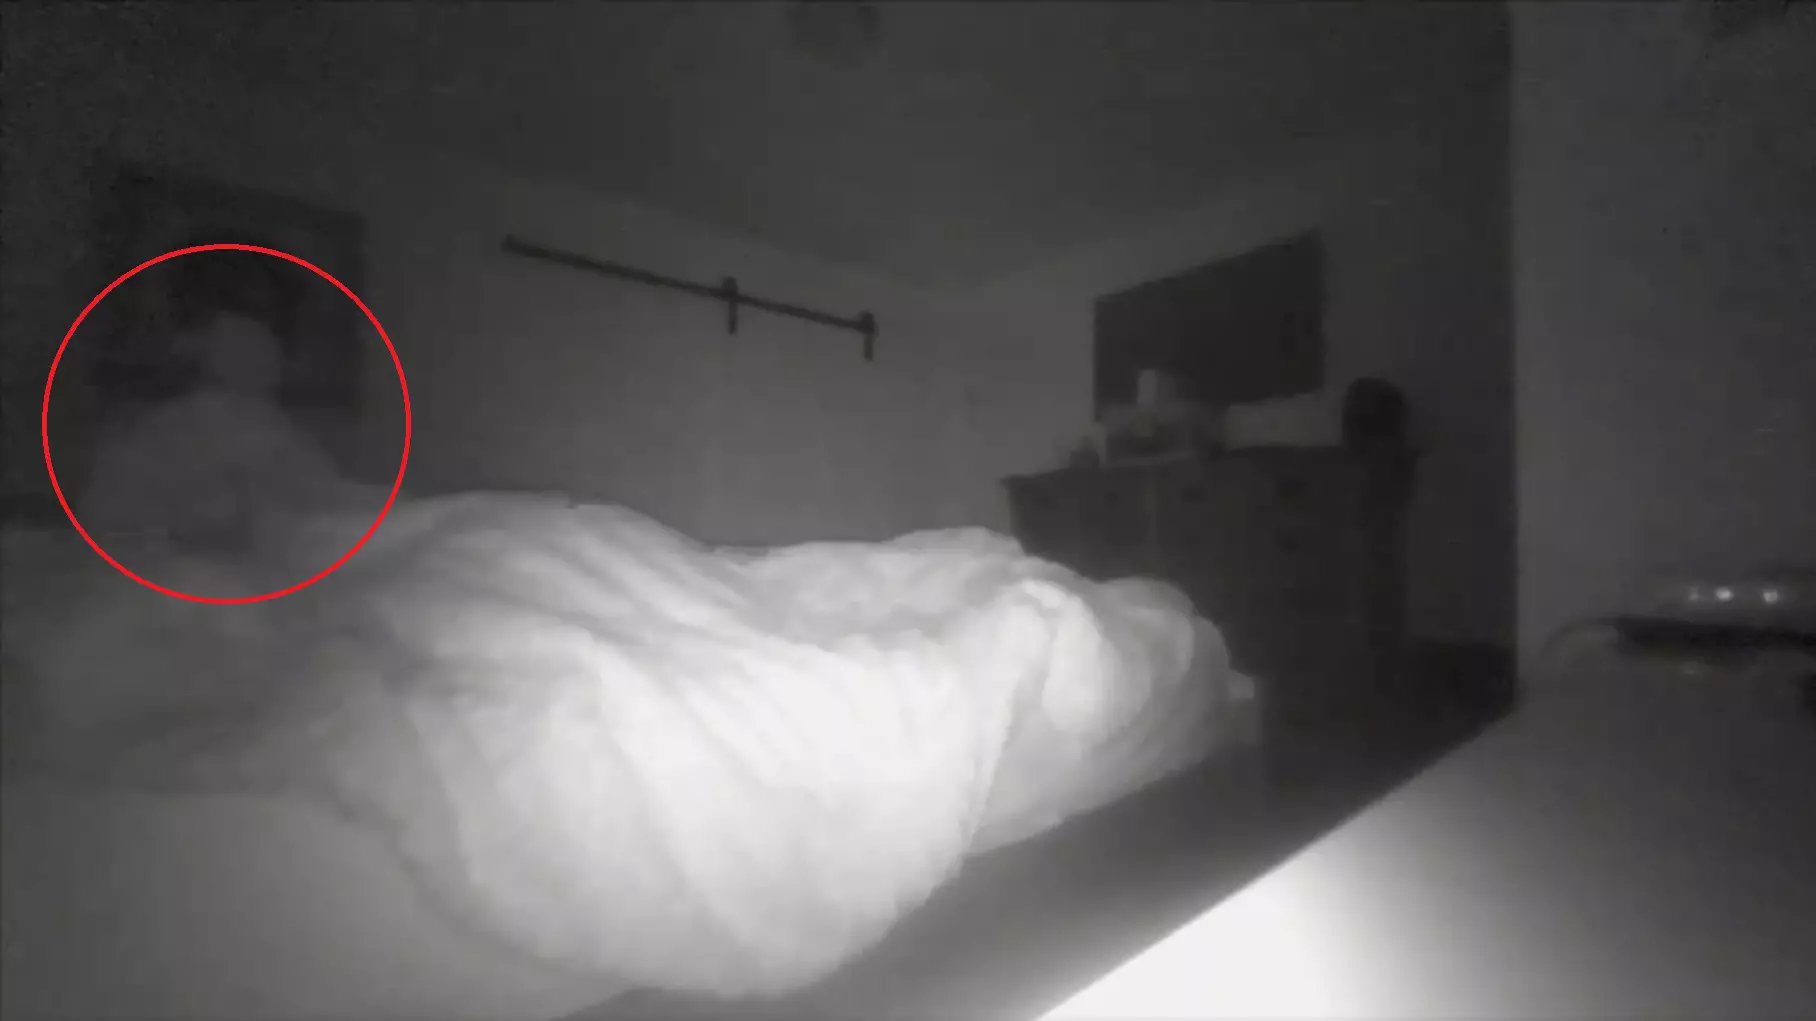 Video Footage Shows 'Ghost' Moving Around In Sleeping Man's Bedroom